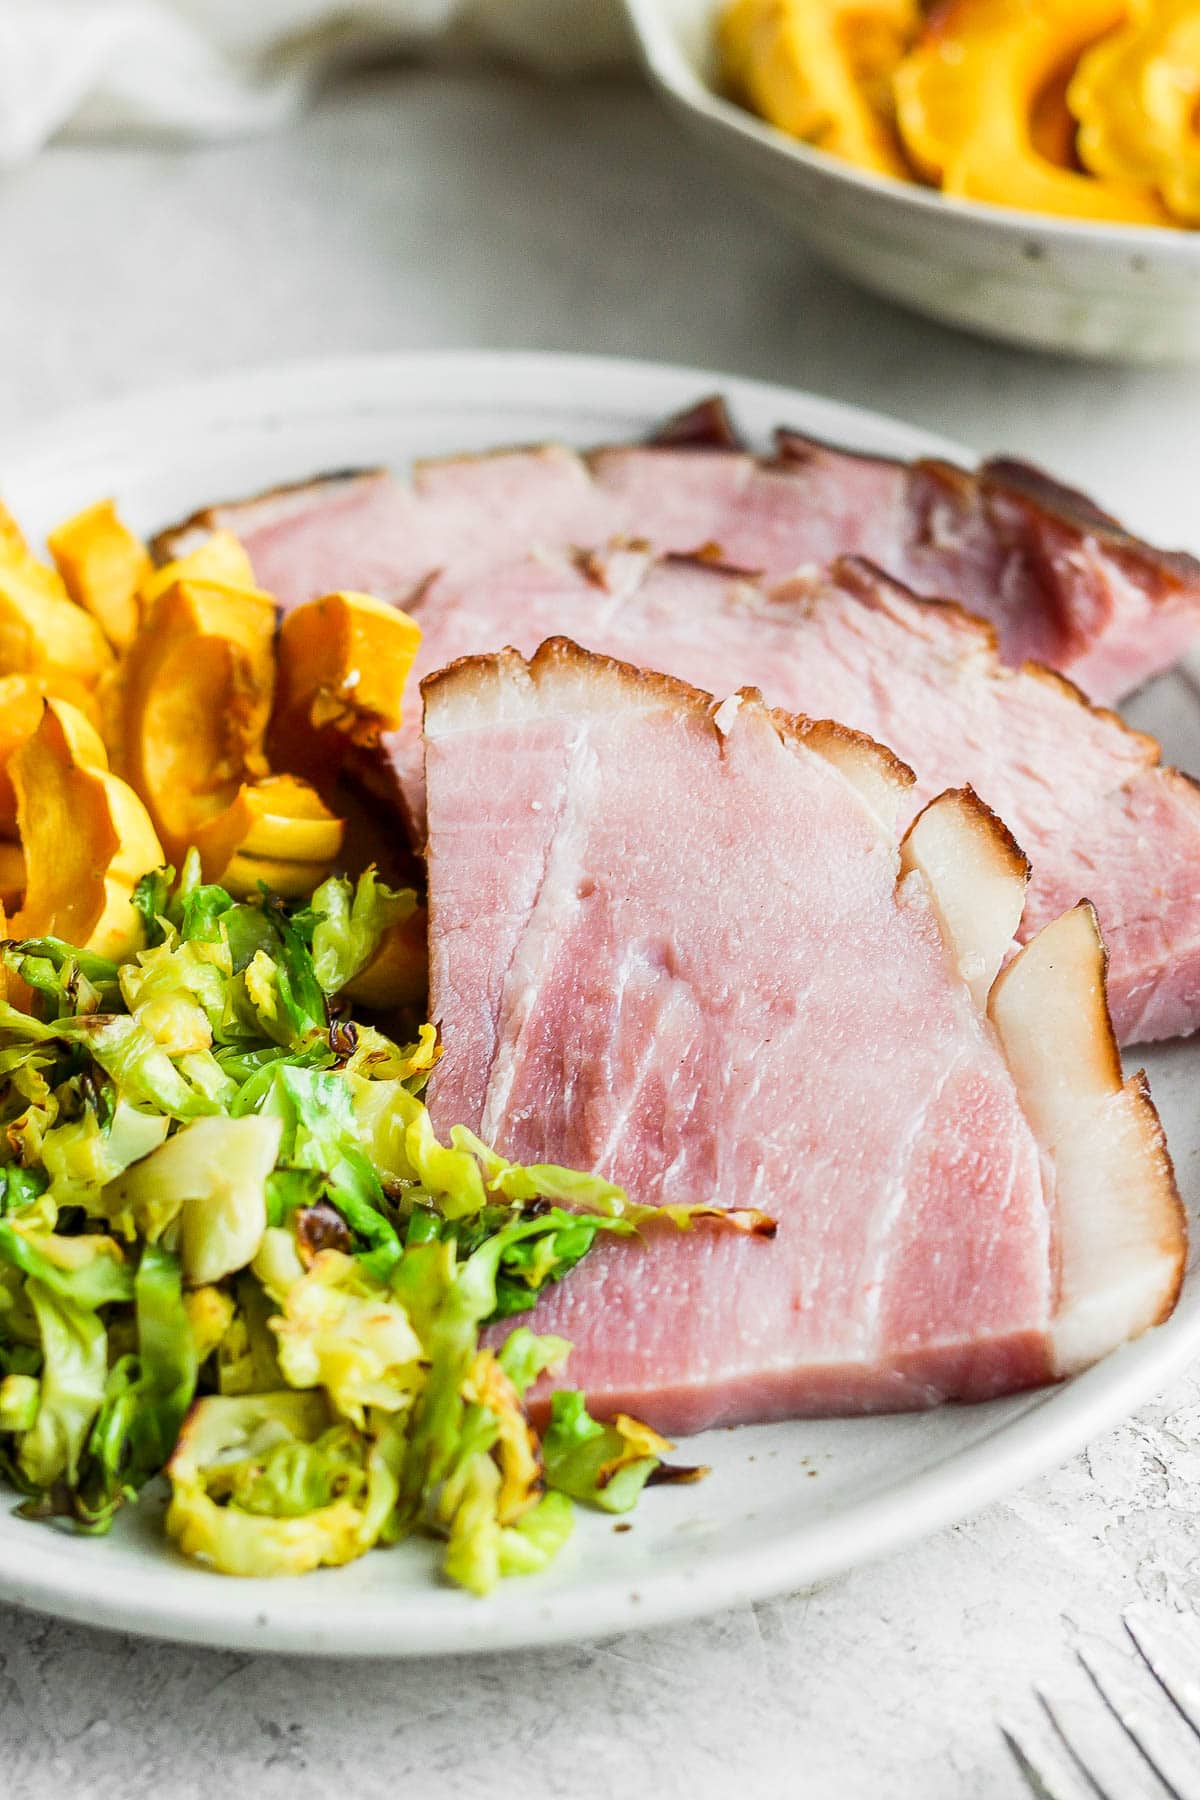 Plate with slices of baked ham, squash, and shaved brussel sprouts.